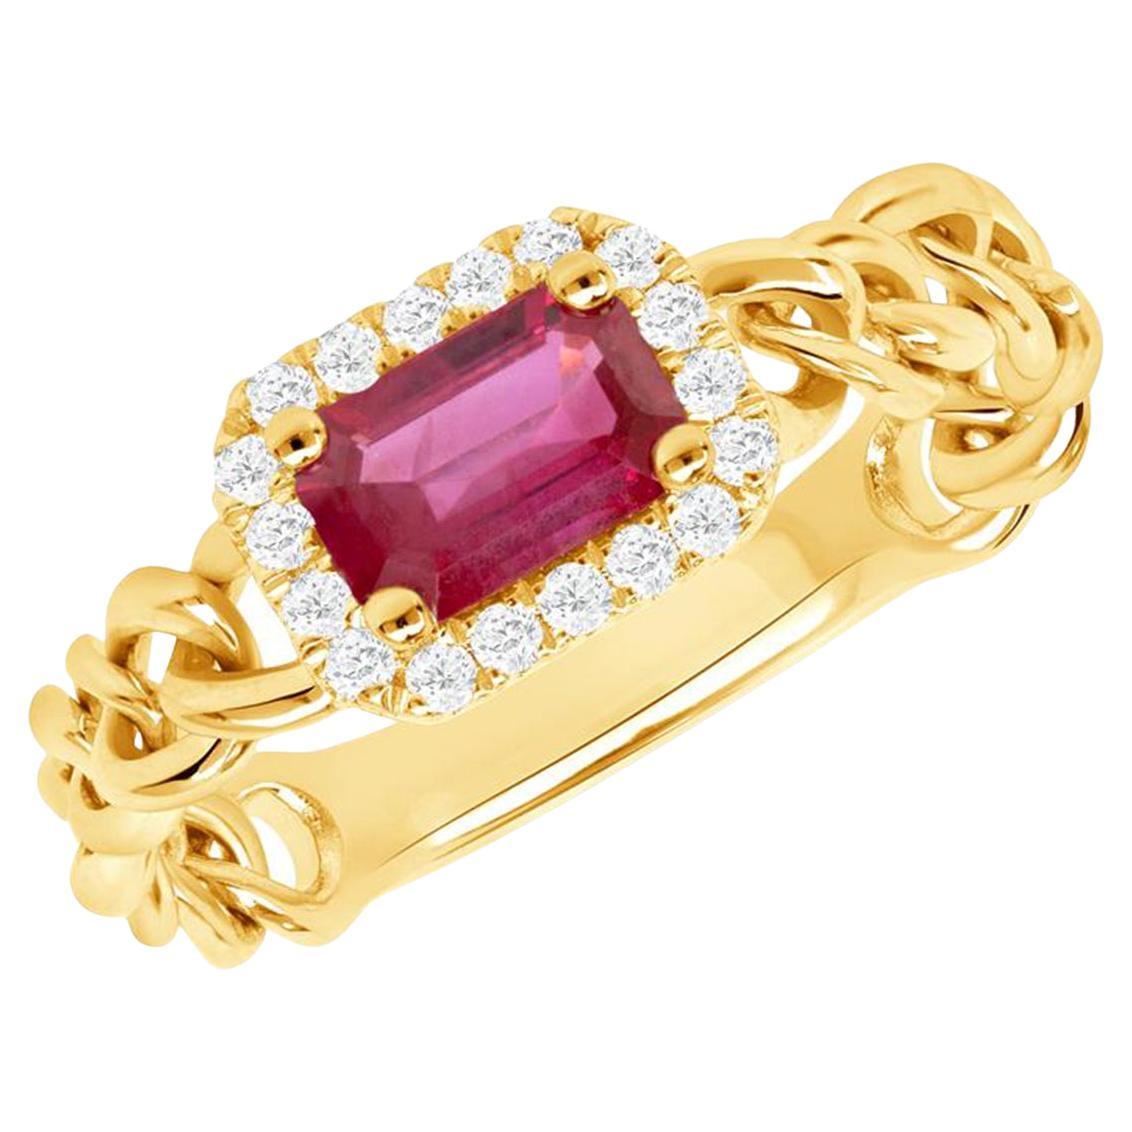 0.60 Ct Ruby & 0.11 Ct Diamonds in 14K Yellow Gold Band Ring For Sale